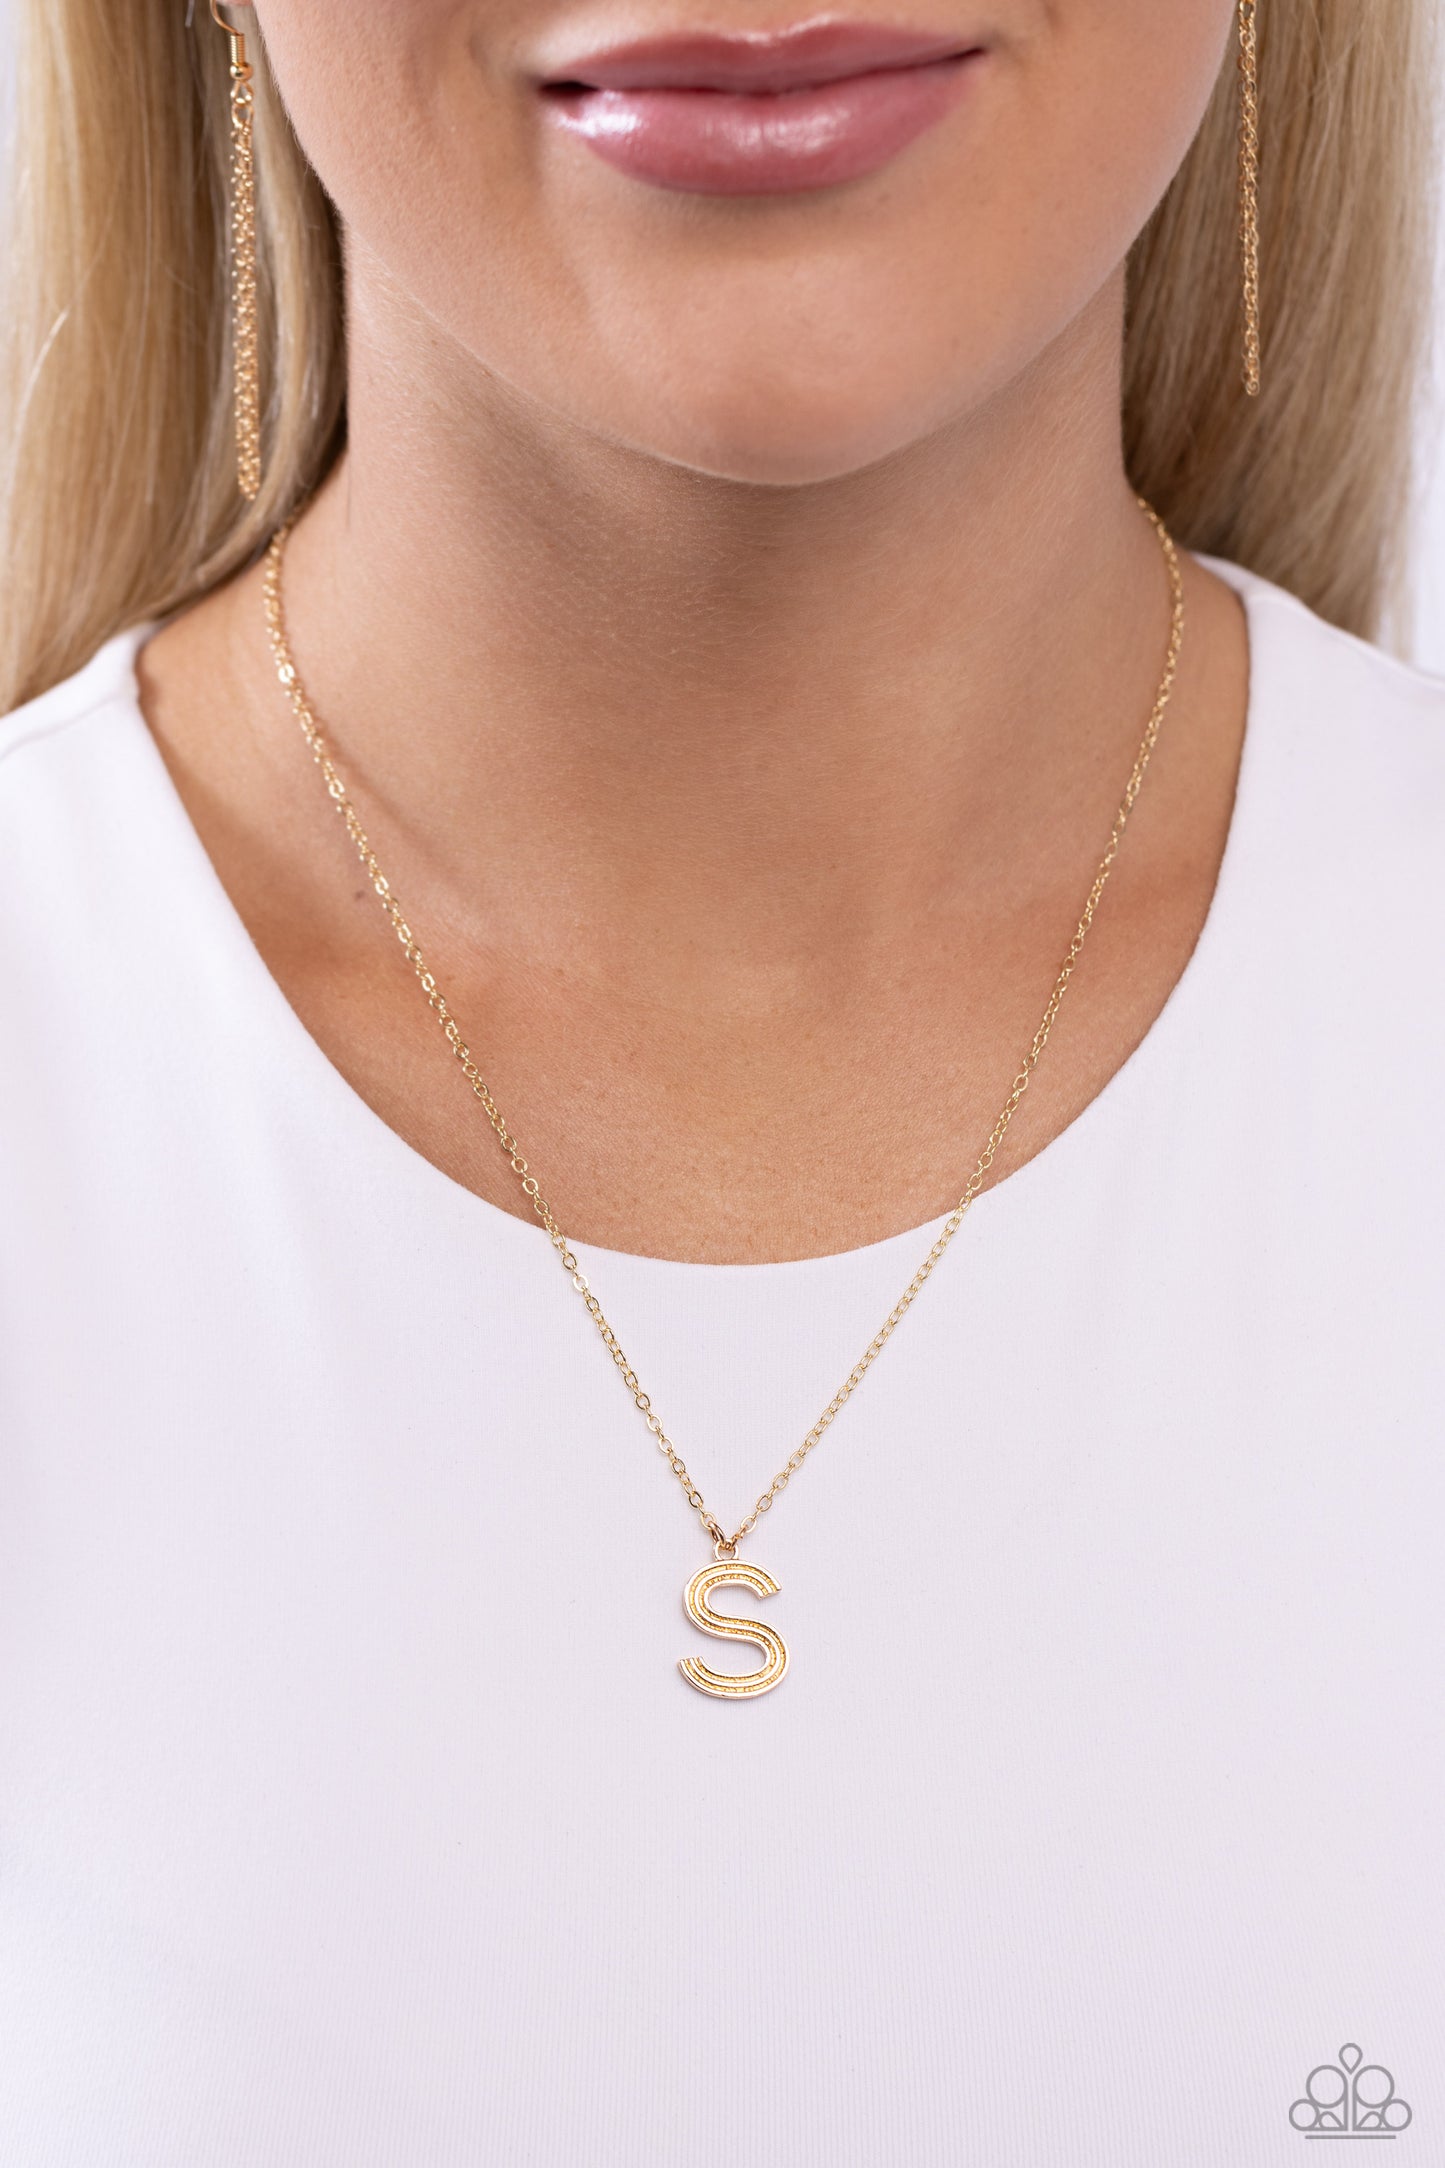 Leave Your Initials Gold *S* Necklace Paparazzi